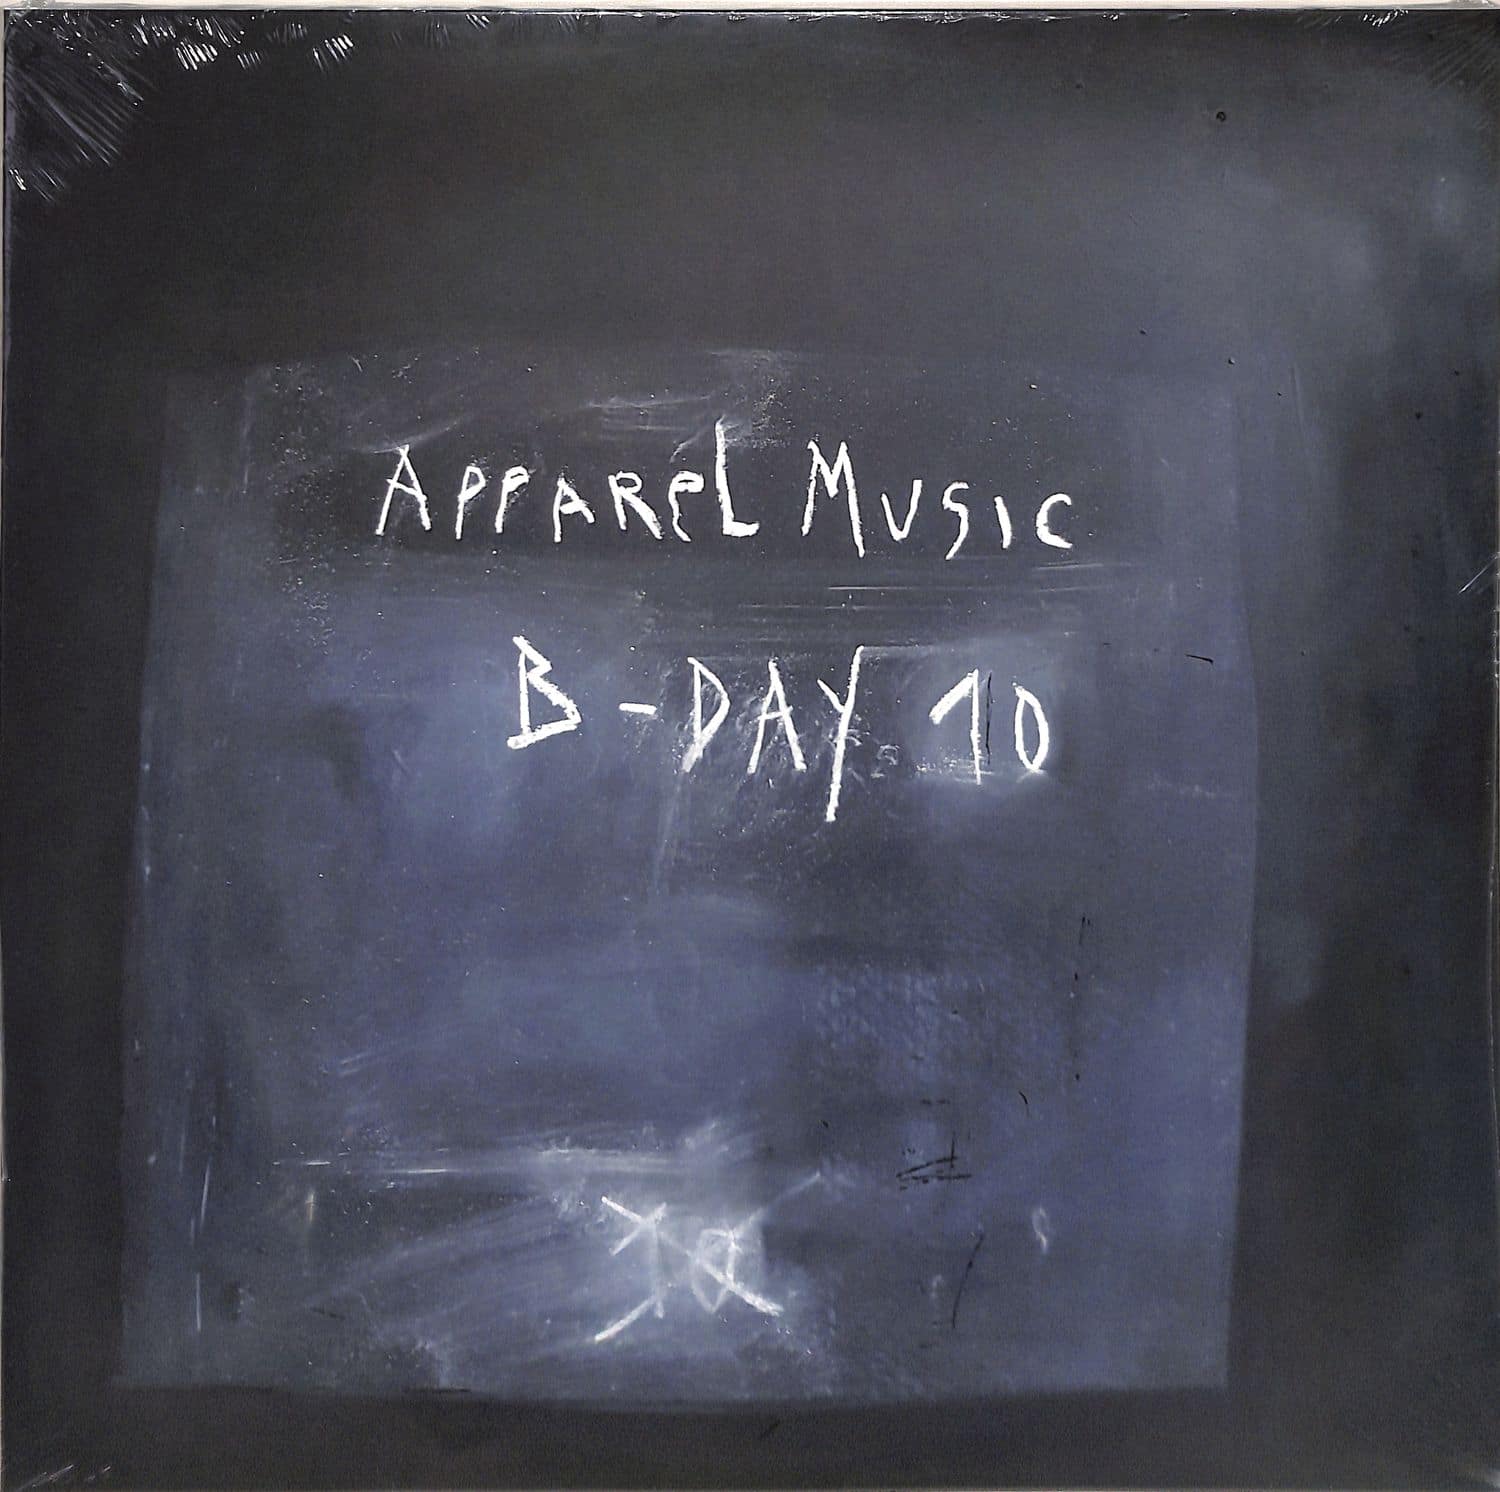 Various Artists - APPAREL MUSIC B-DAY 10 